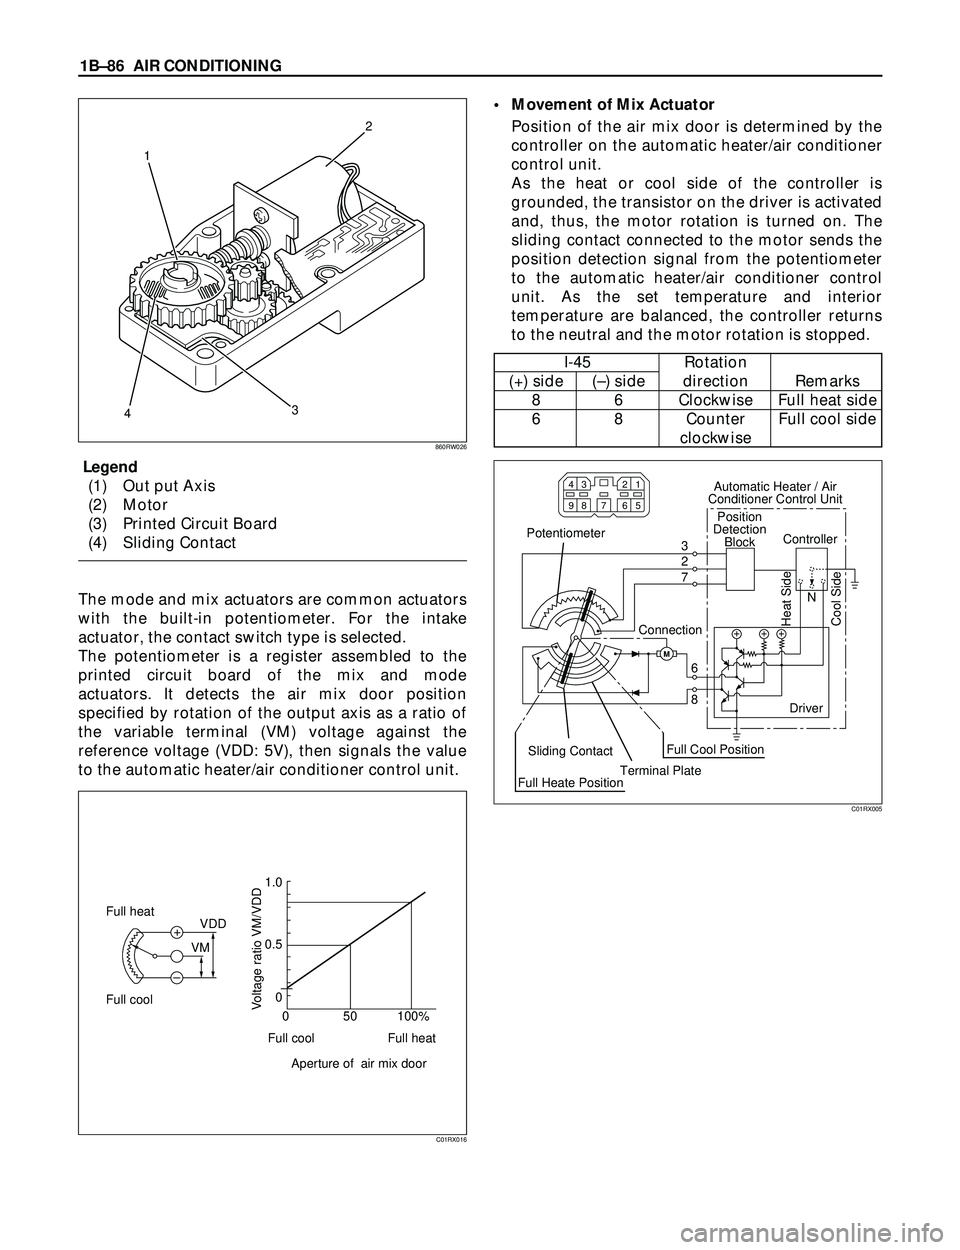 ISUZU TROOPER 1998  Service Repair Manual 1BÐ86 AIR CONDITIONING
Legend
(1) Out put Axis
(2) Motor
(3) Printed Circuit Board
(4) Sliding Contact
The mode and mix actuators are common actuators
with the built-in potentiometer. For the intake
